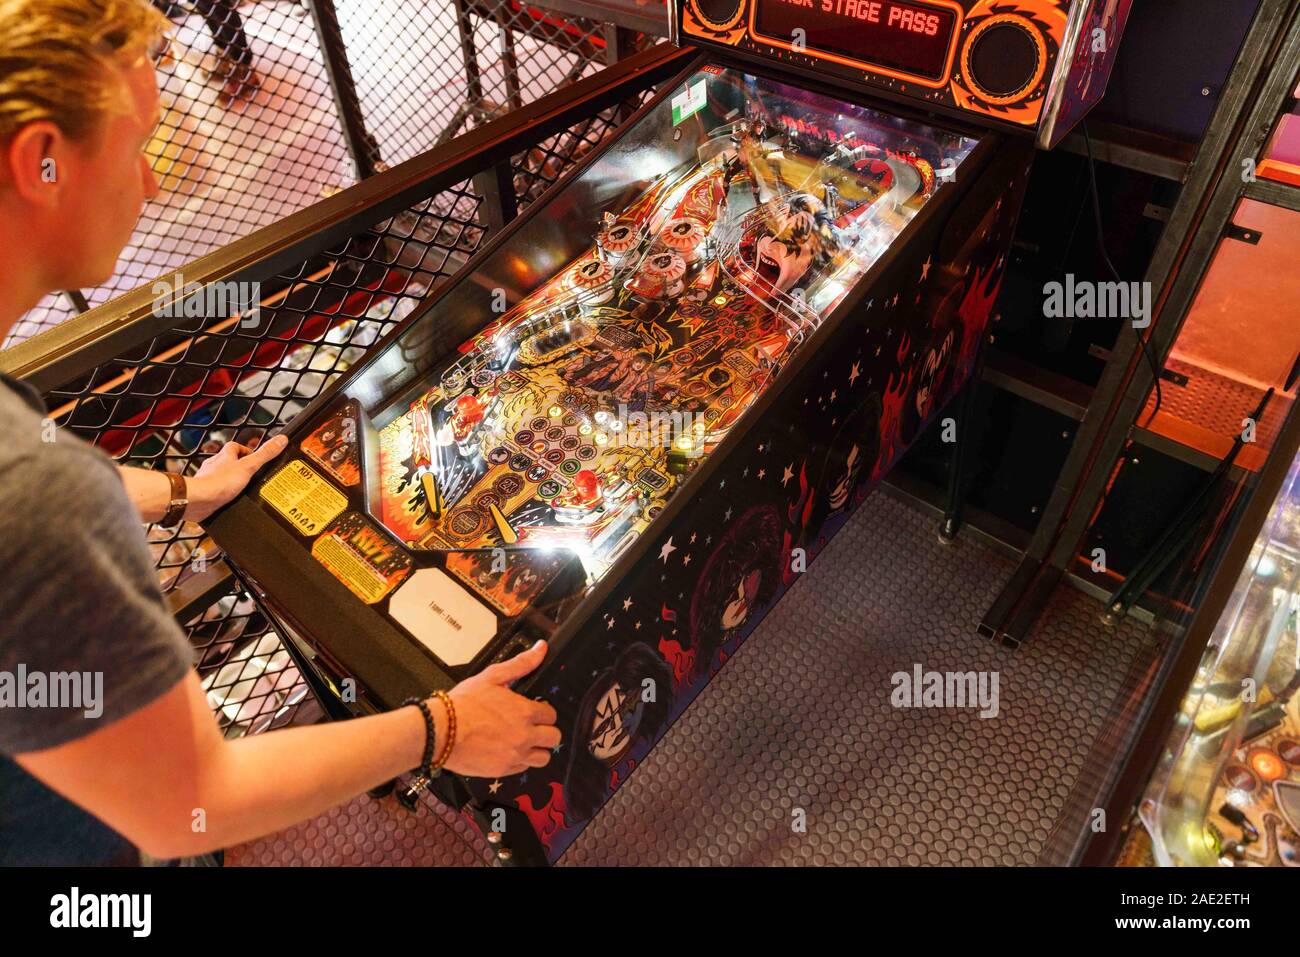 Page 2 - Arcade Games High Resolution Stock Photography and Images - Alamy